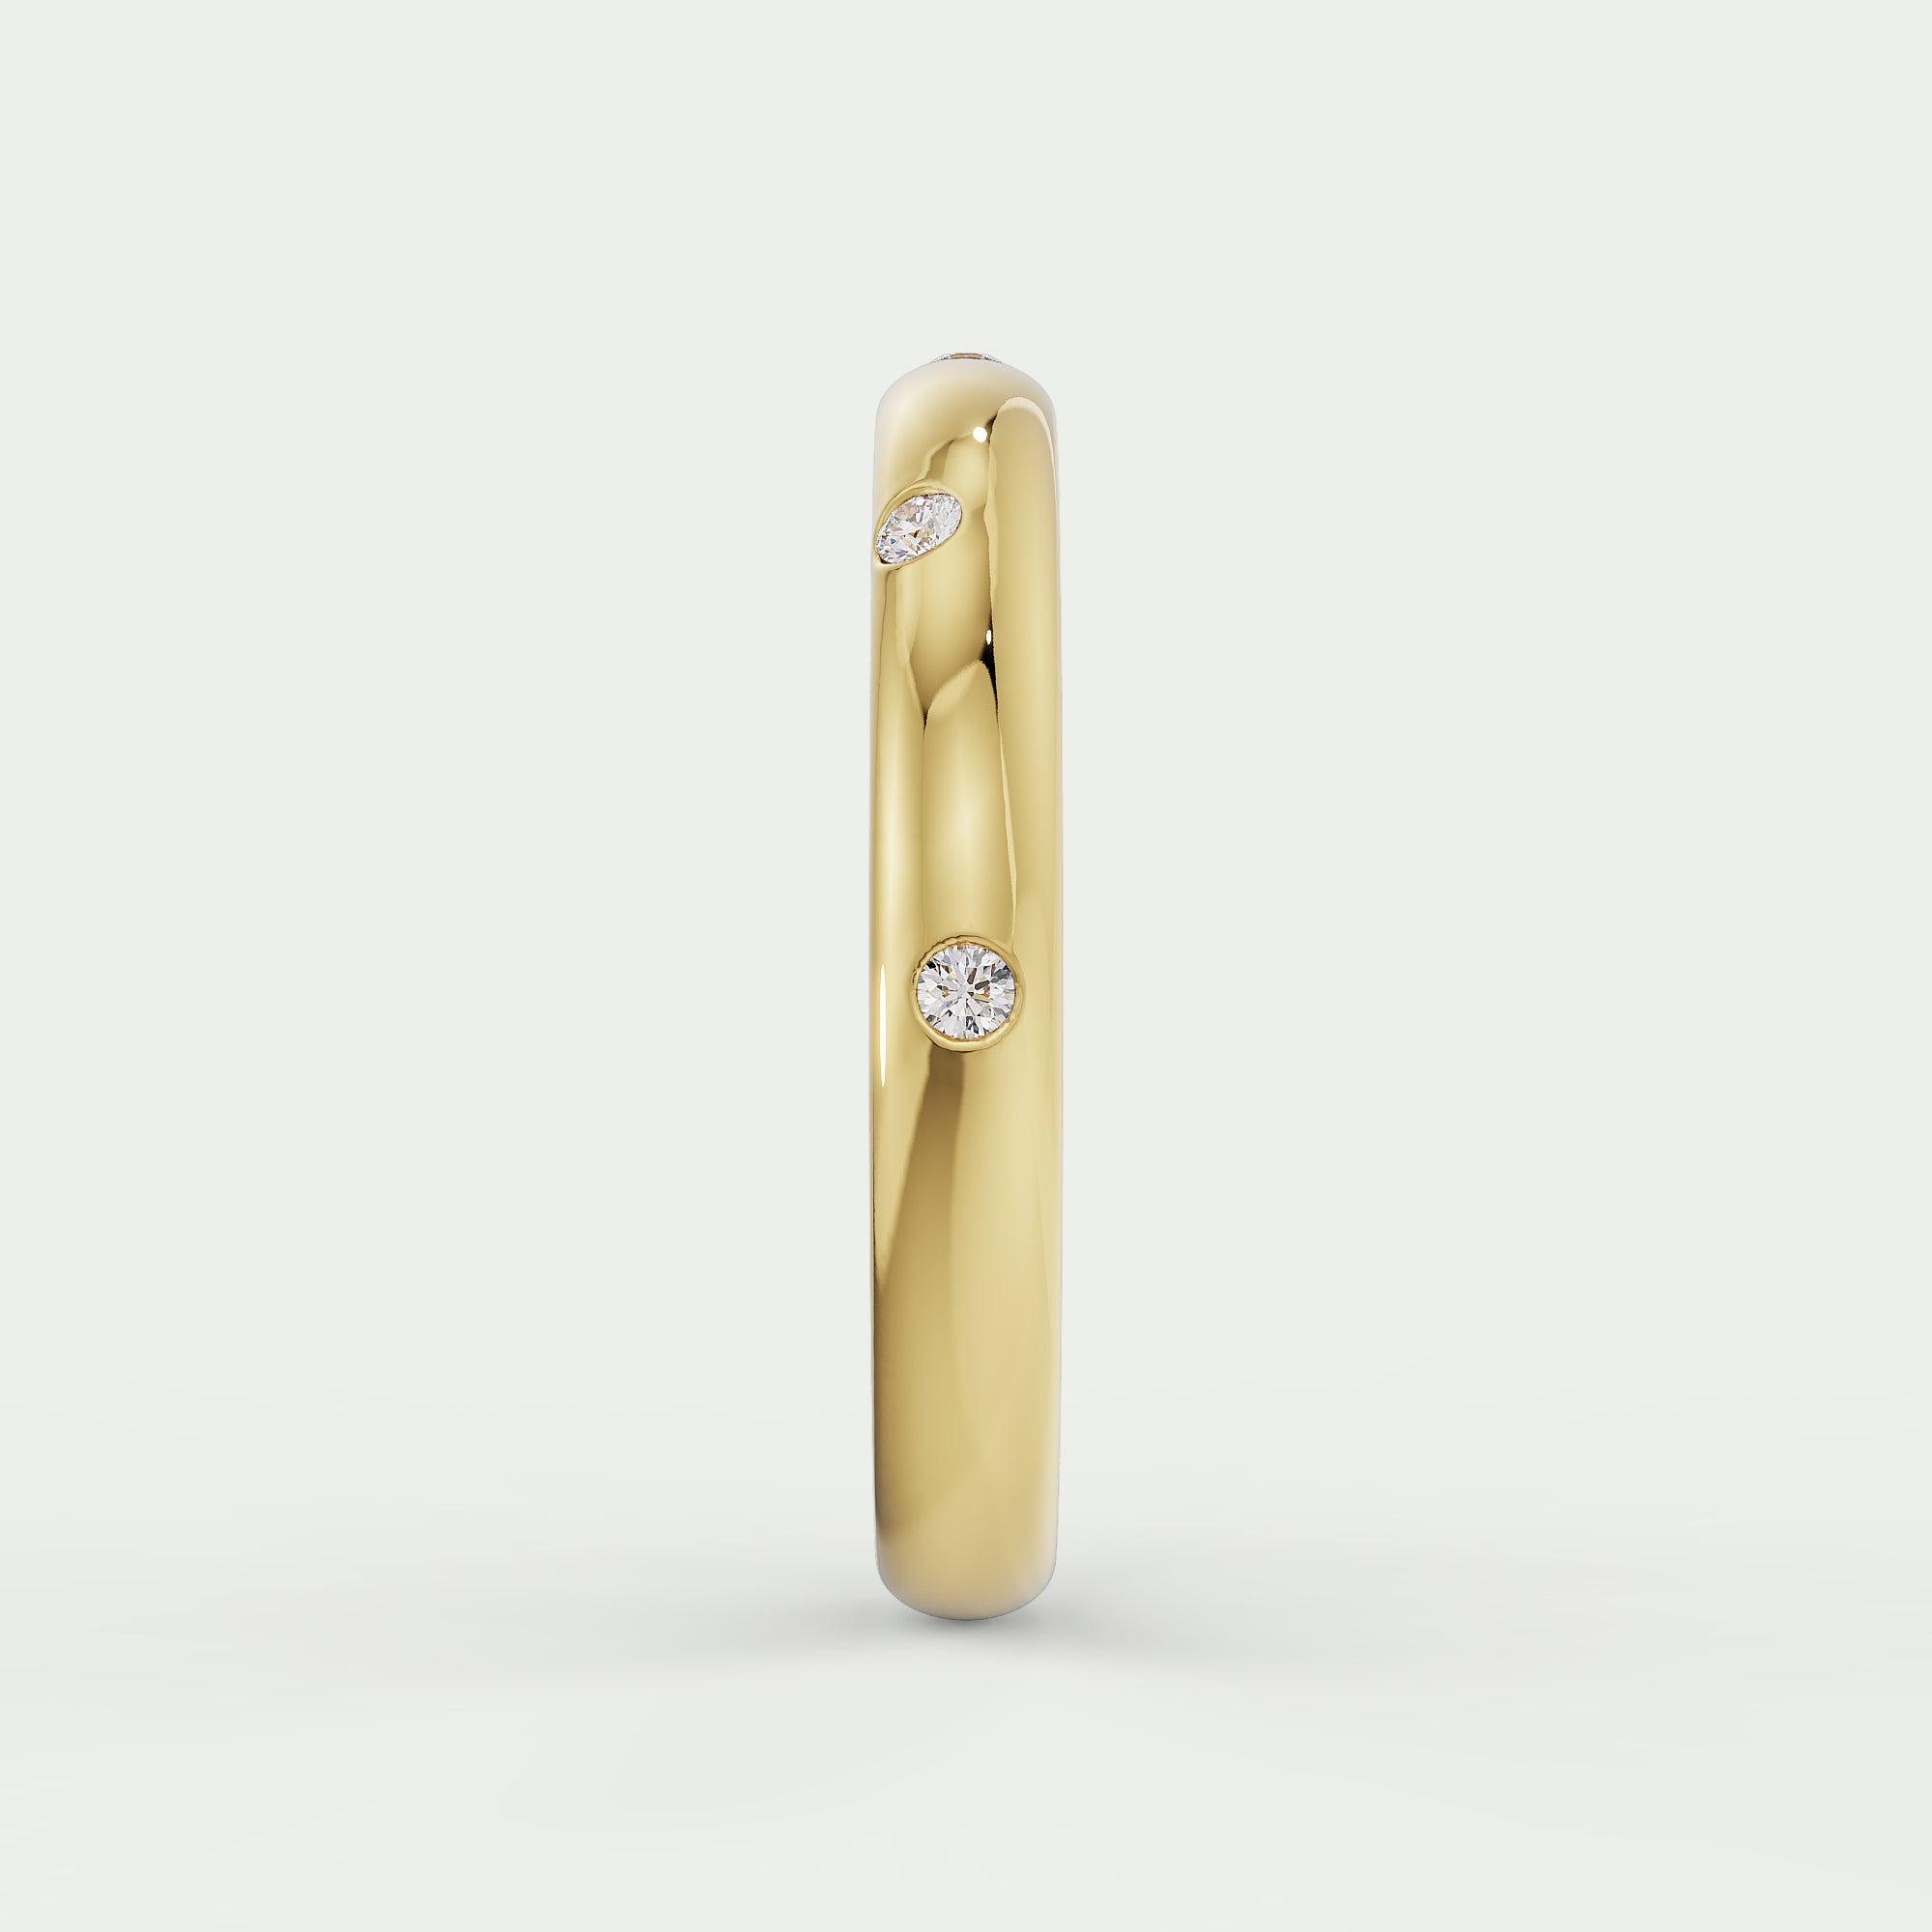 MARY | 5 mm 18K Gold Band with 5 Diamonds